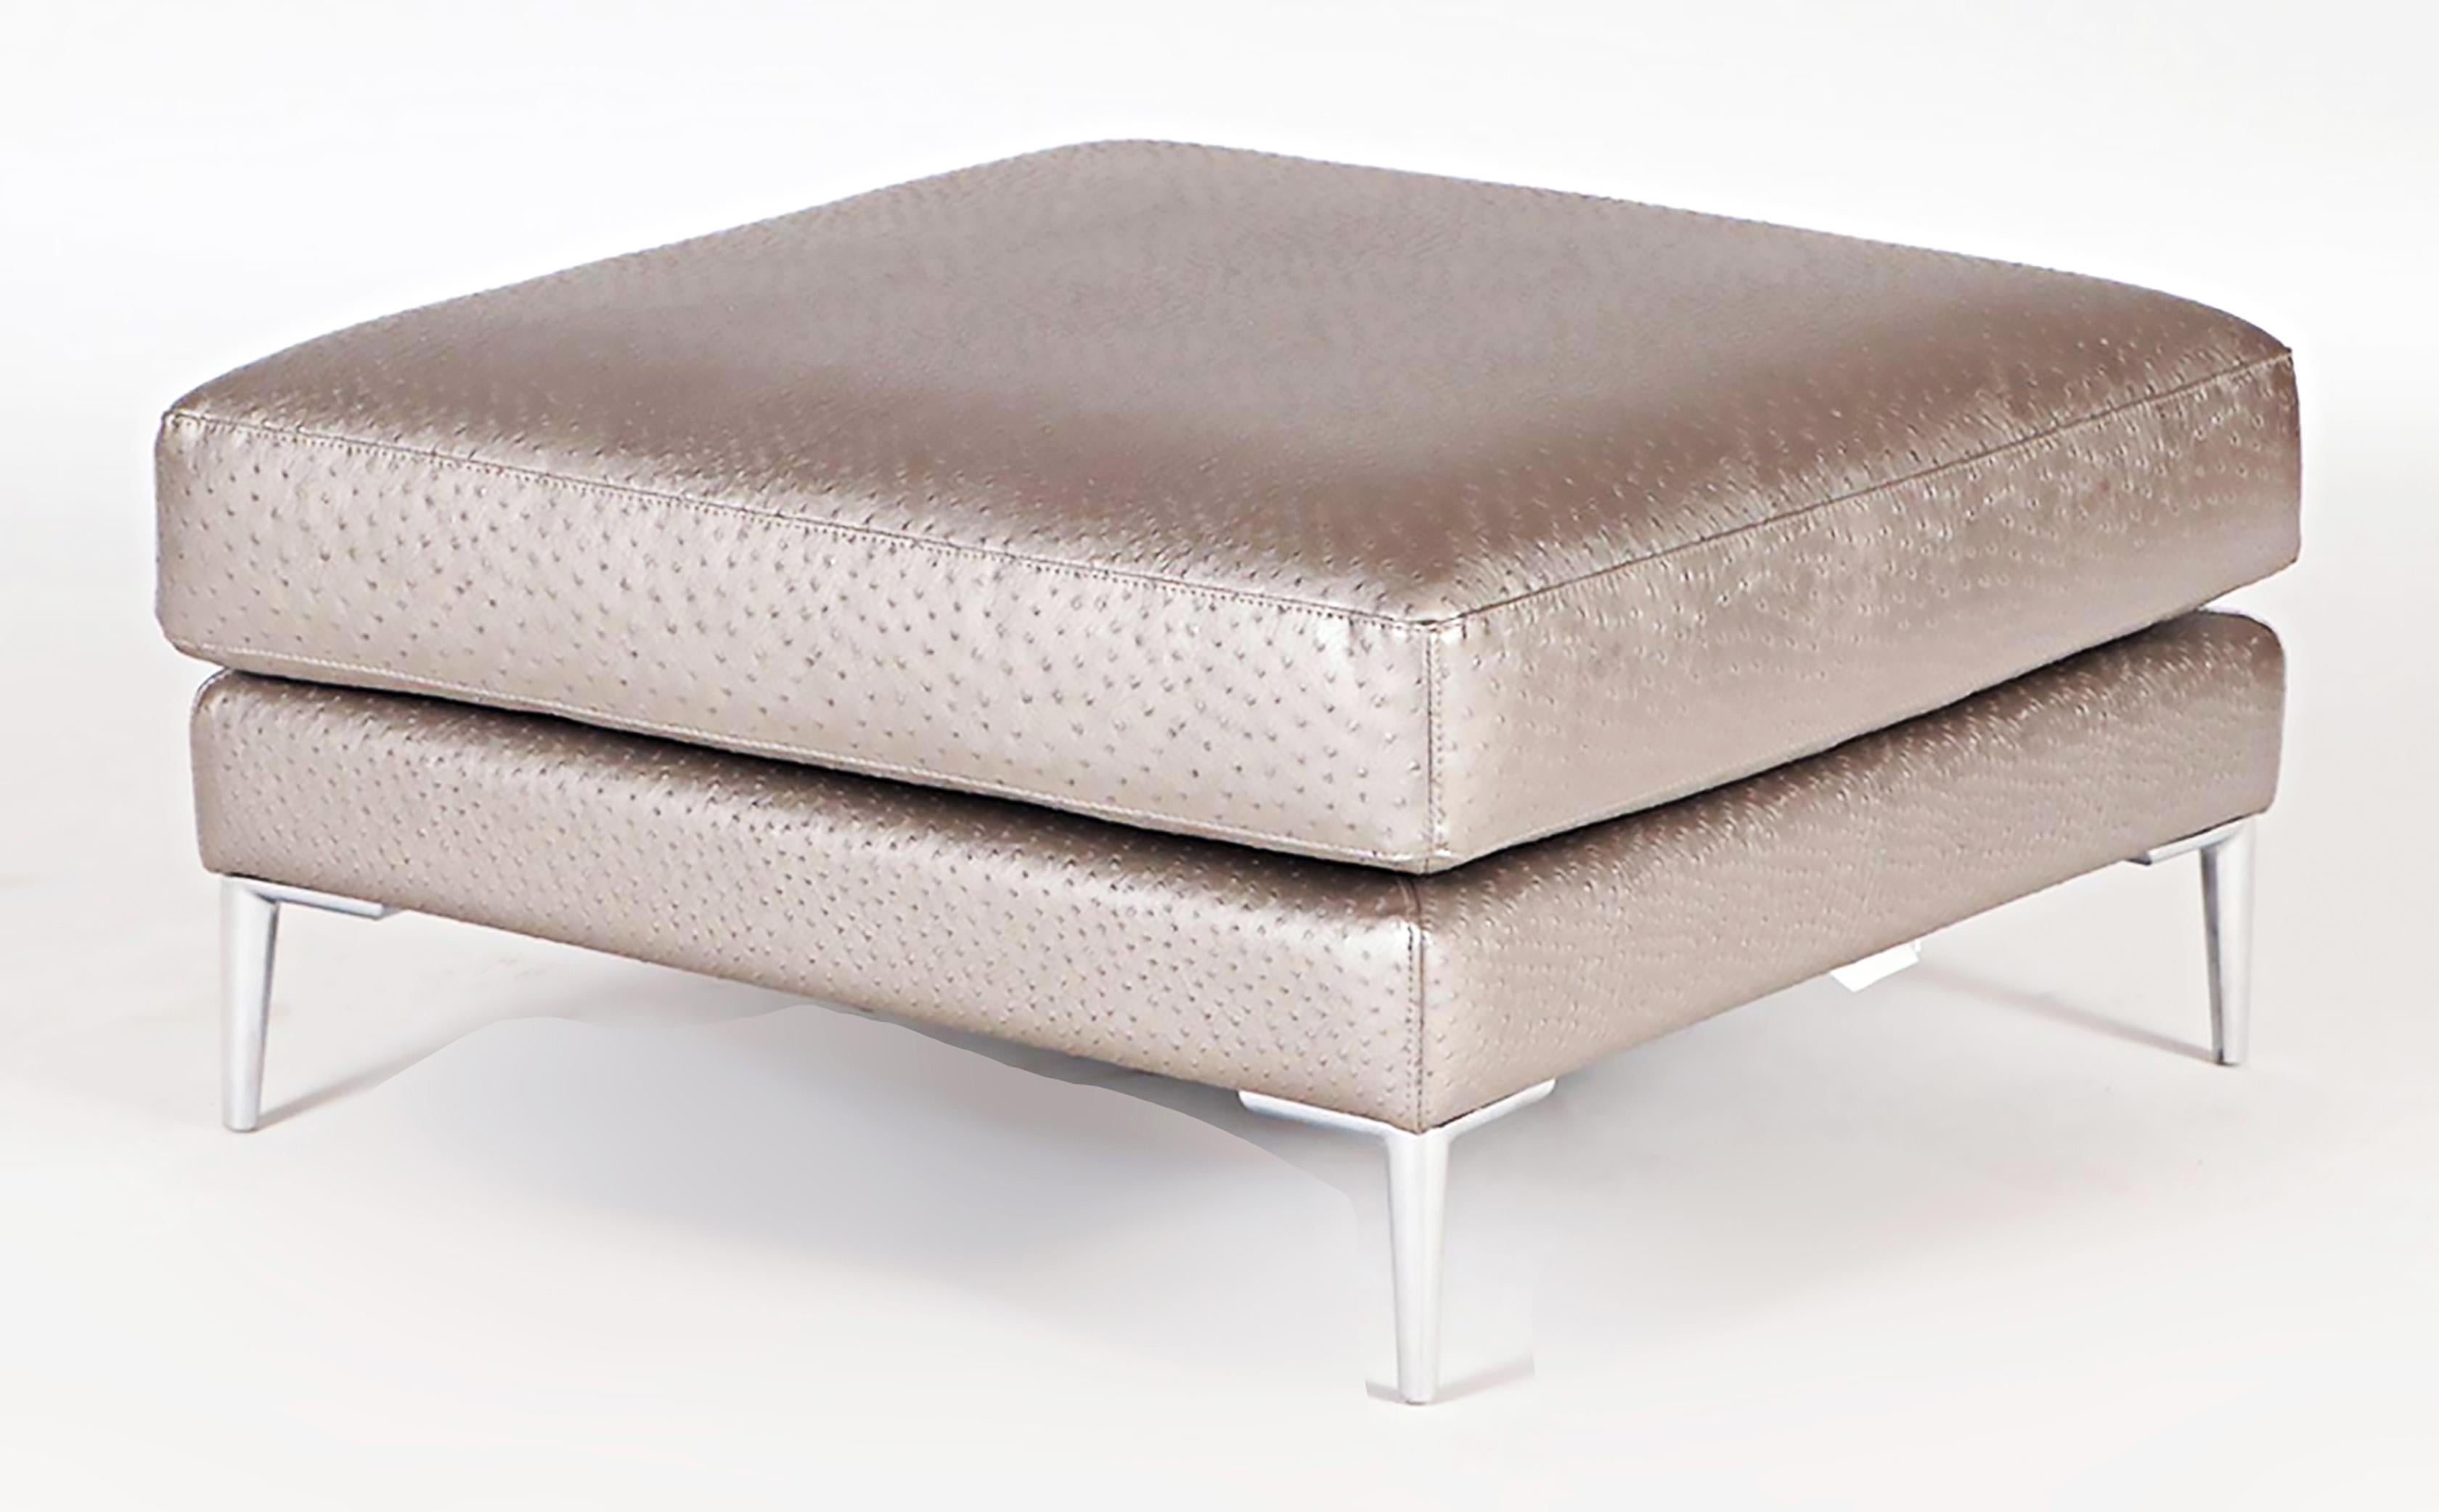 Dellarobbia faux ostrich leather and stainless steel ottoman.

Offered for sale is an elegant square leather ottoman by Dellarobbia. The leather on the ottoman is embossed with a faux-ostrich pattern. The ottoman is supported by stainless steel